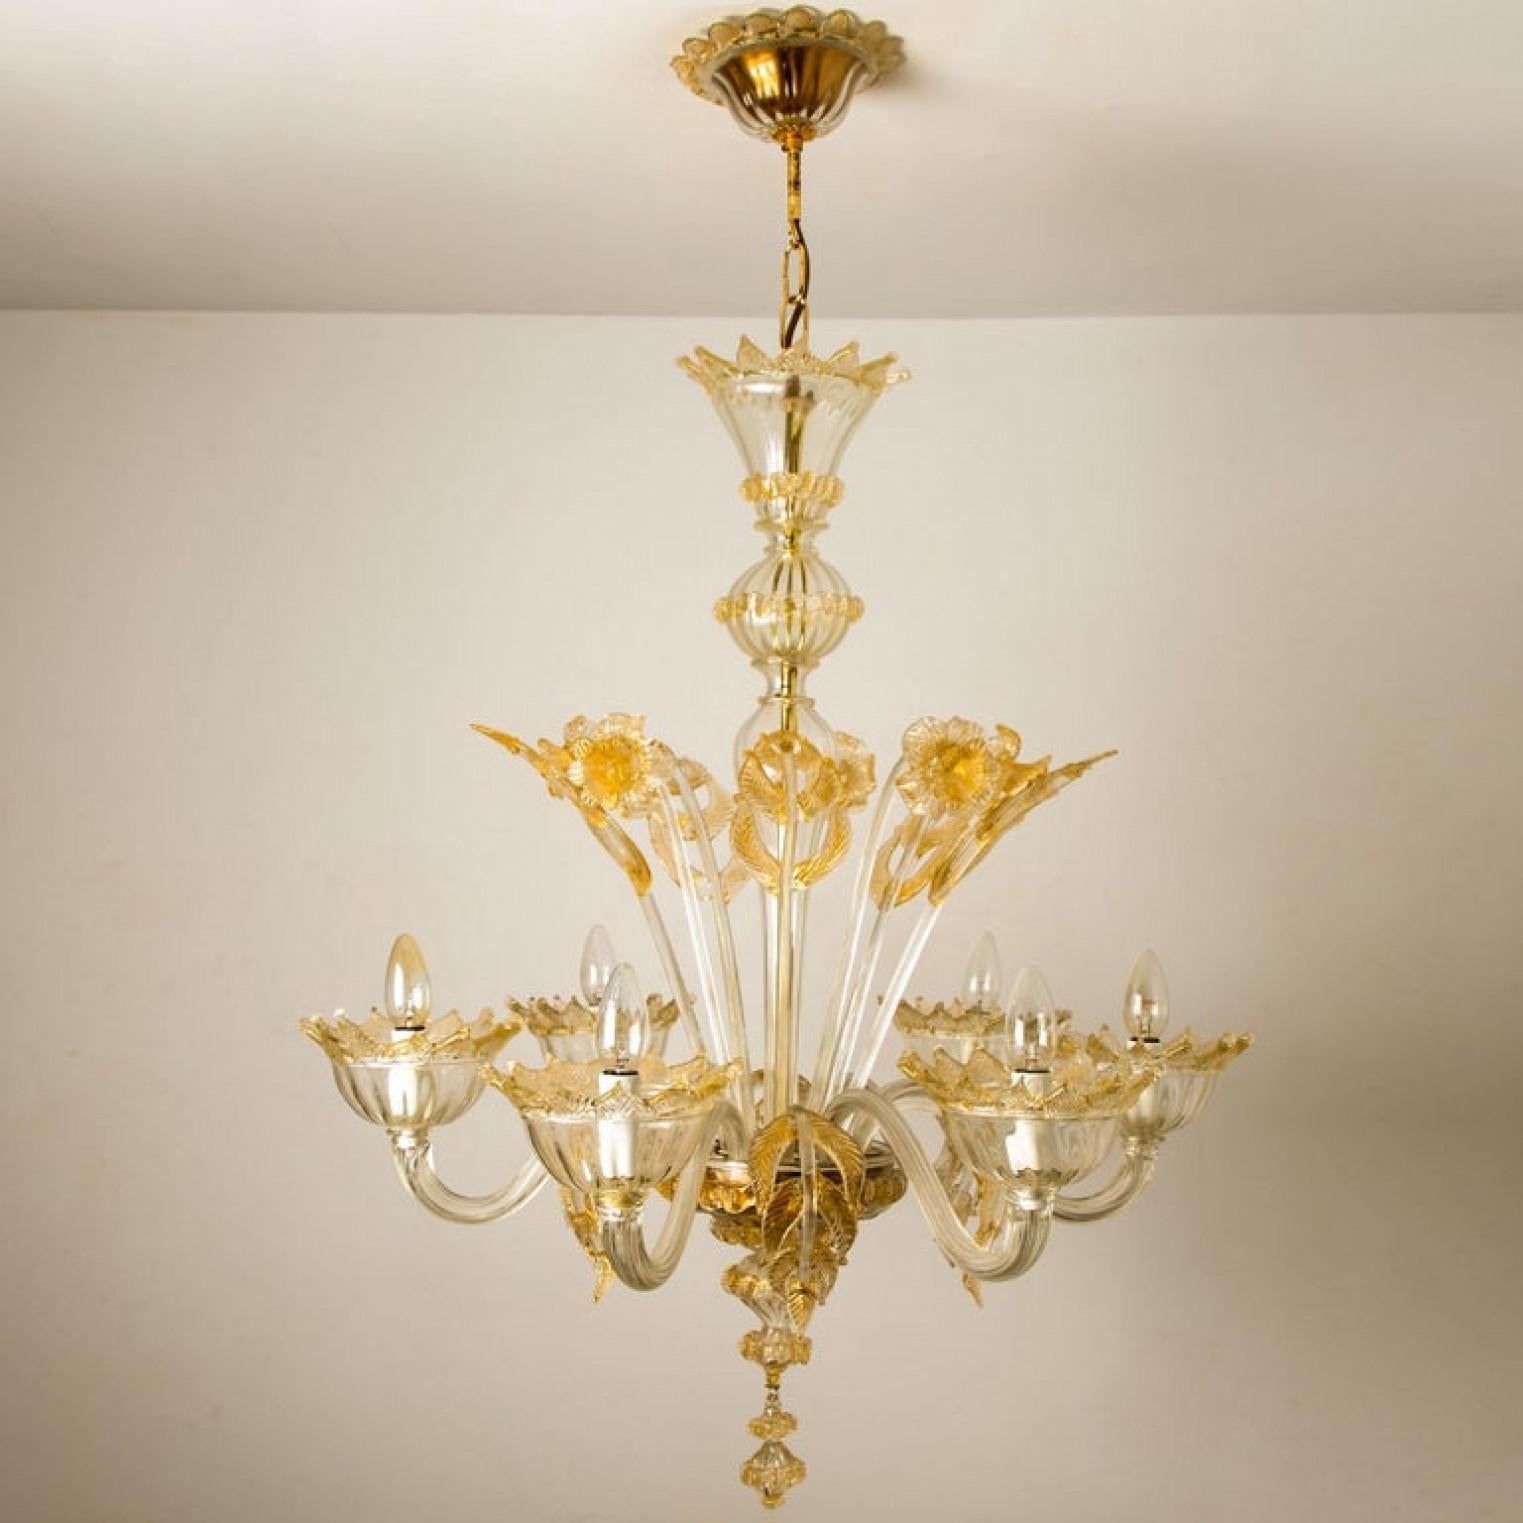 Mid-Century Modern Large Venetian Chandelier in Gilded Murano Glass, by Barovier, 1950s For Sale